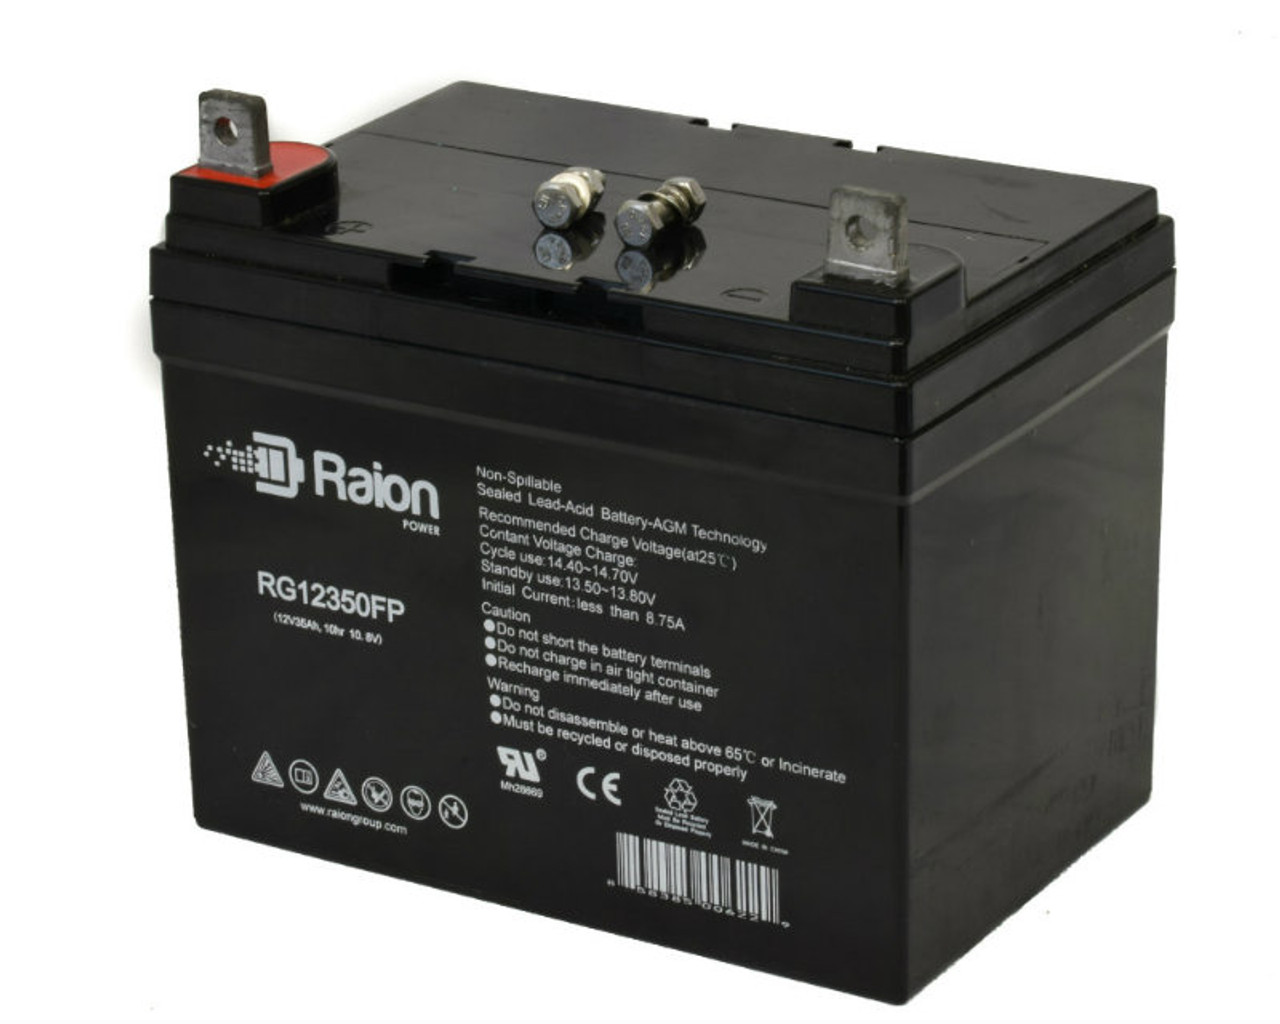 Raion Power Replacement 12V 35Ah Battery for E.T. Rugg Co. 5088-E - 1 Pack